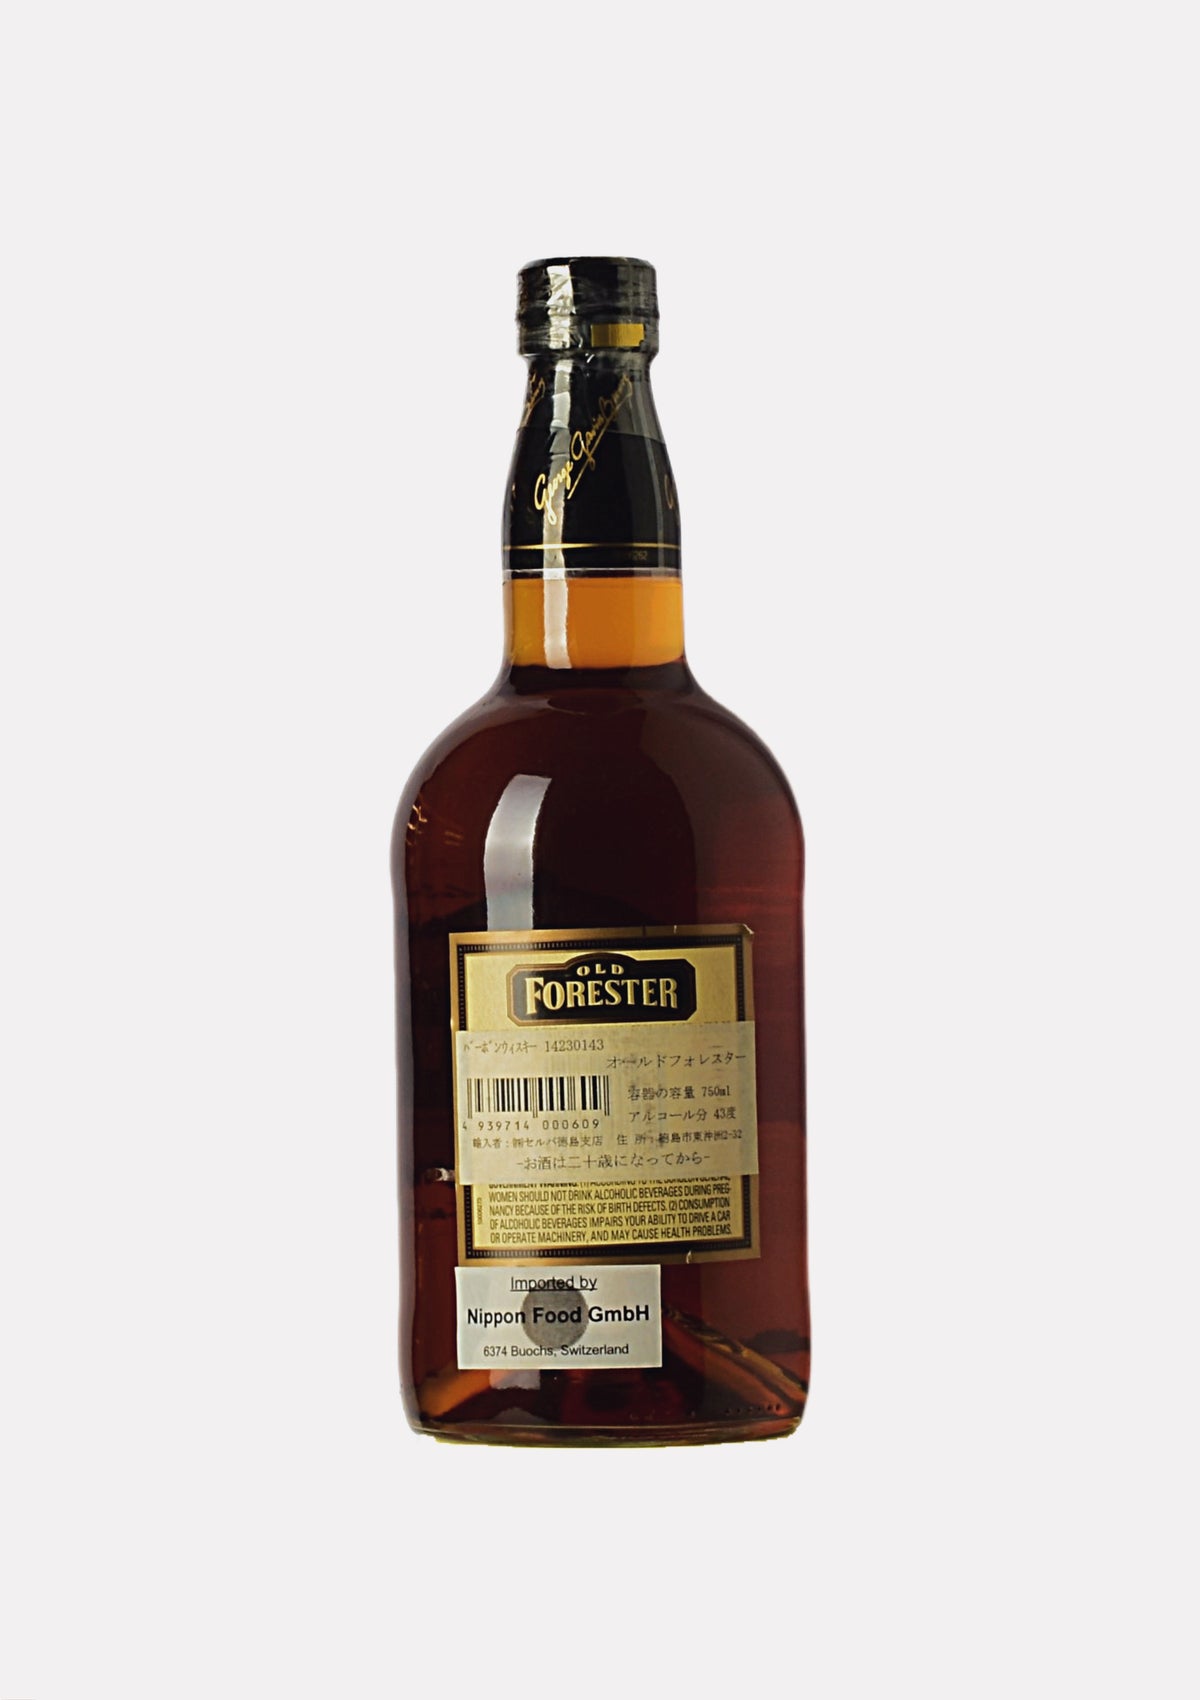 Old Forester Kentucky Straight Bourbon Whiskey